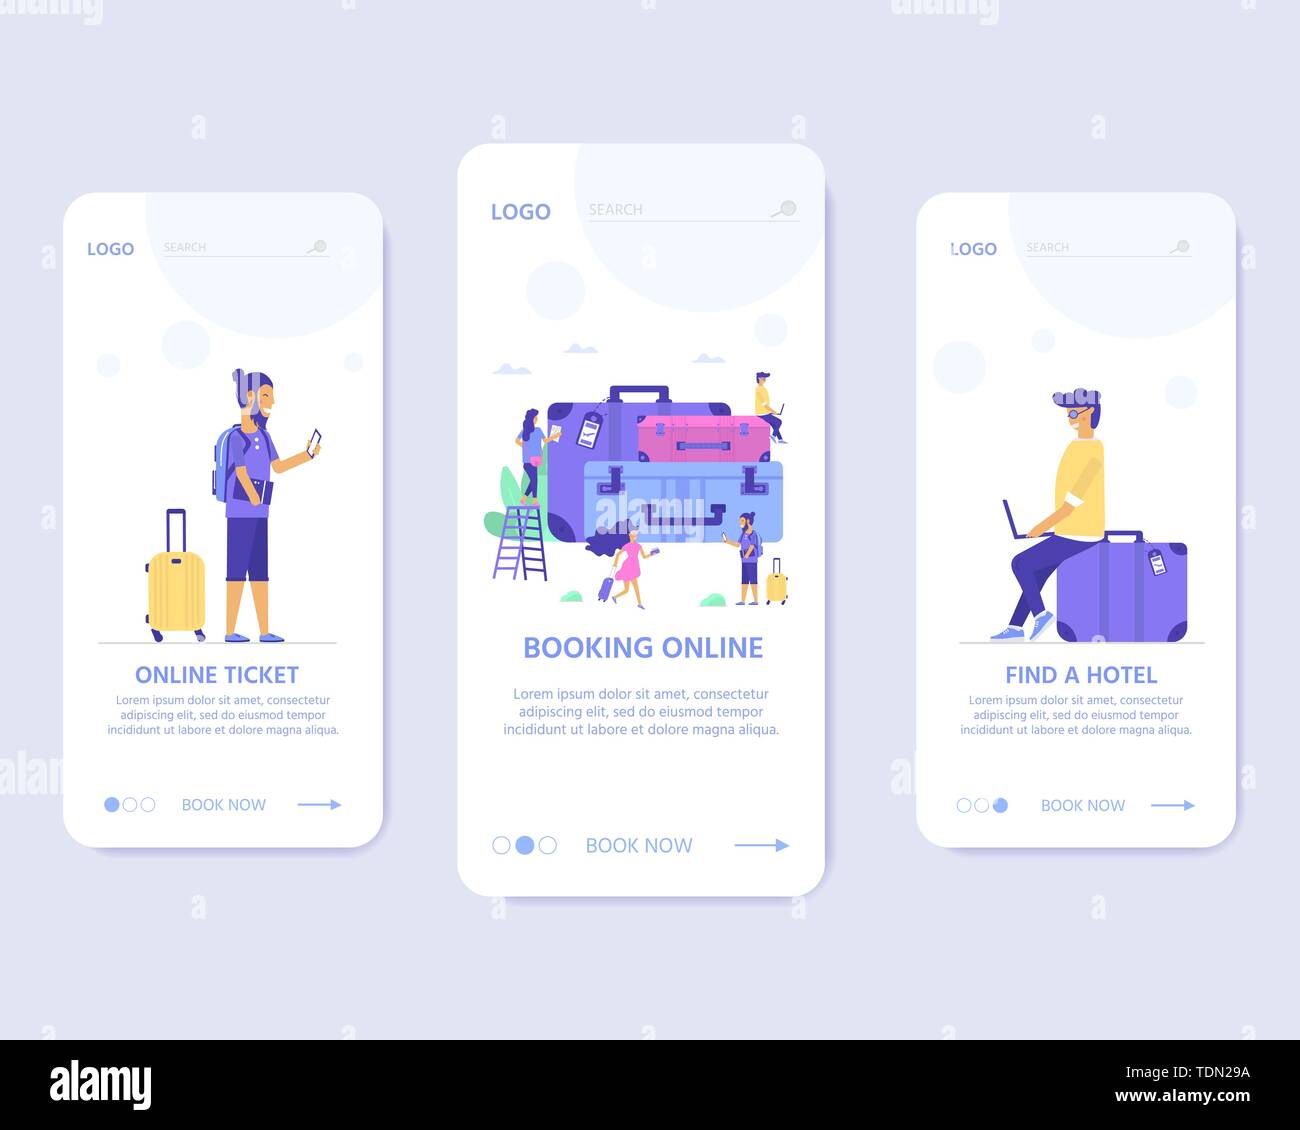 Young people with phone, bag and baggage. Travel and tourism concept for website template, online booking reservation, landing page, banner, flight ti Stock Vector